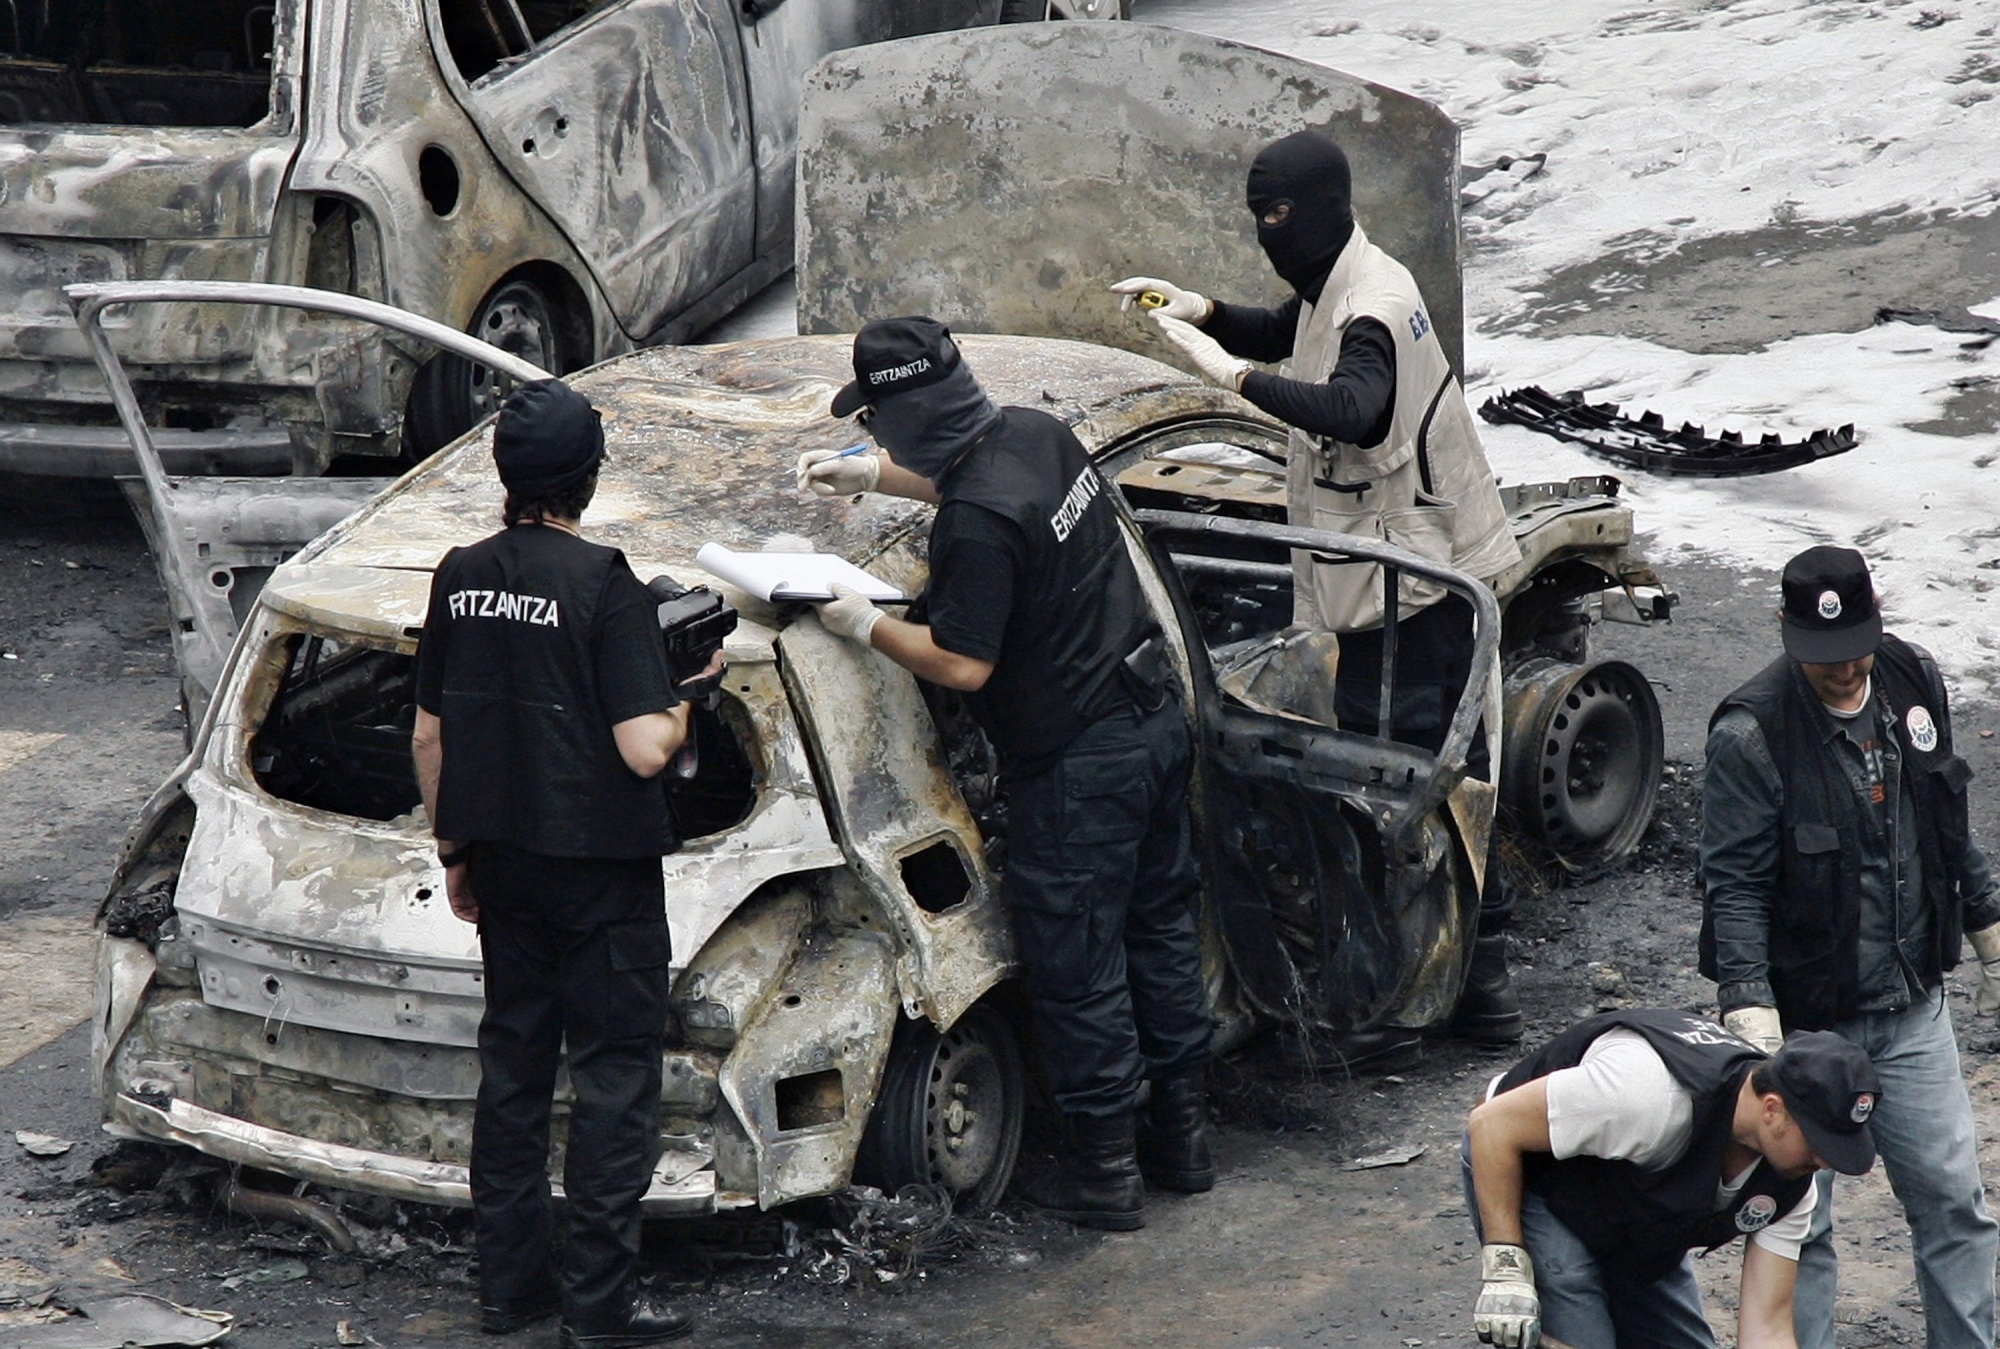 Police examine a car after it exploded in Bilbao, northern Spain, Tuesday Oct. 9, 2007. The bomb exploded in the Basque city of Bilbao, injuring a body guard assigned to a politician belonging to the Spanish prime minister's party, Basque regional police said. There was no immediate claim of responsibility but attention immediately focused on the separatist group ETA, which resumed full-scale attacks in August after calling off a cease-fire. (KEYSTONE/AP Photo/Alvaro Barrientos) SPAIN BOMBING